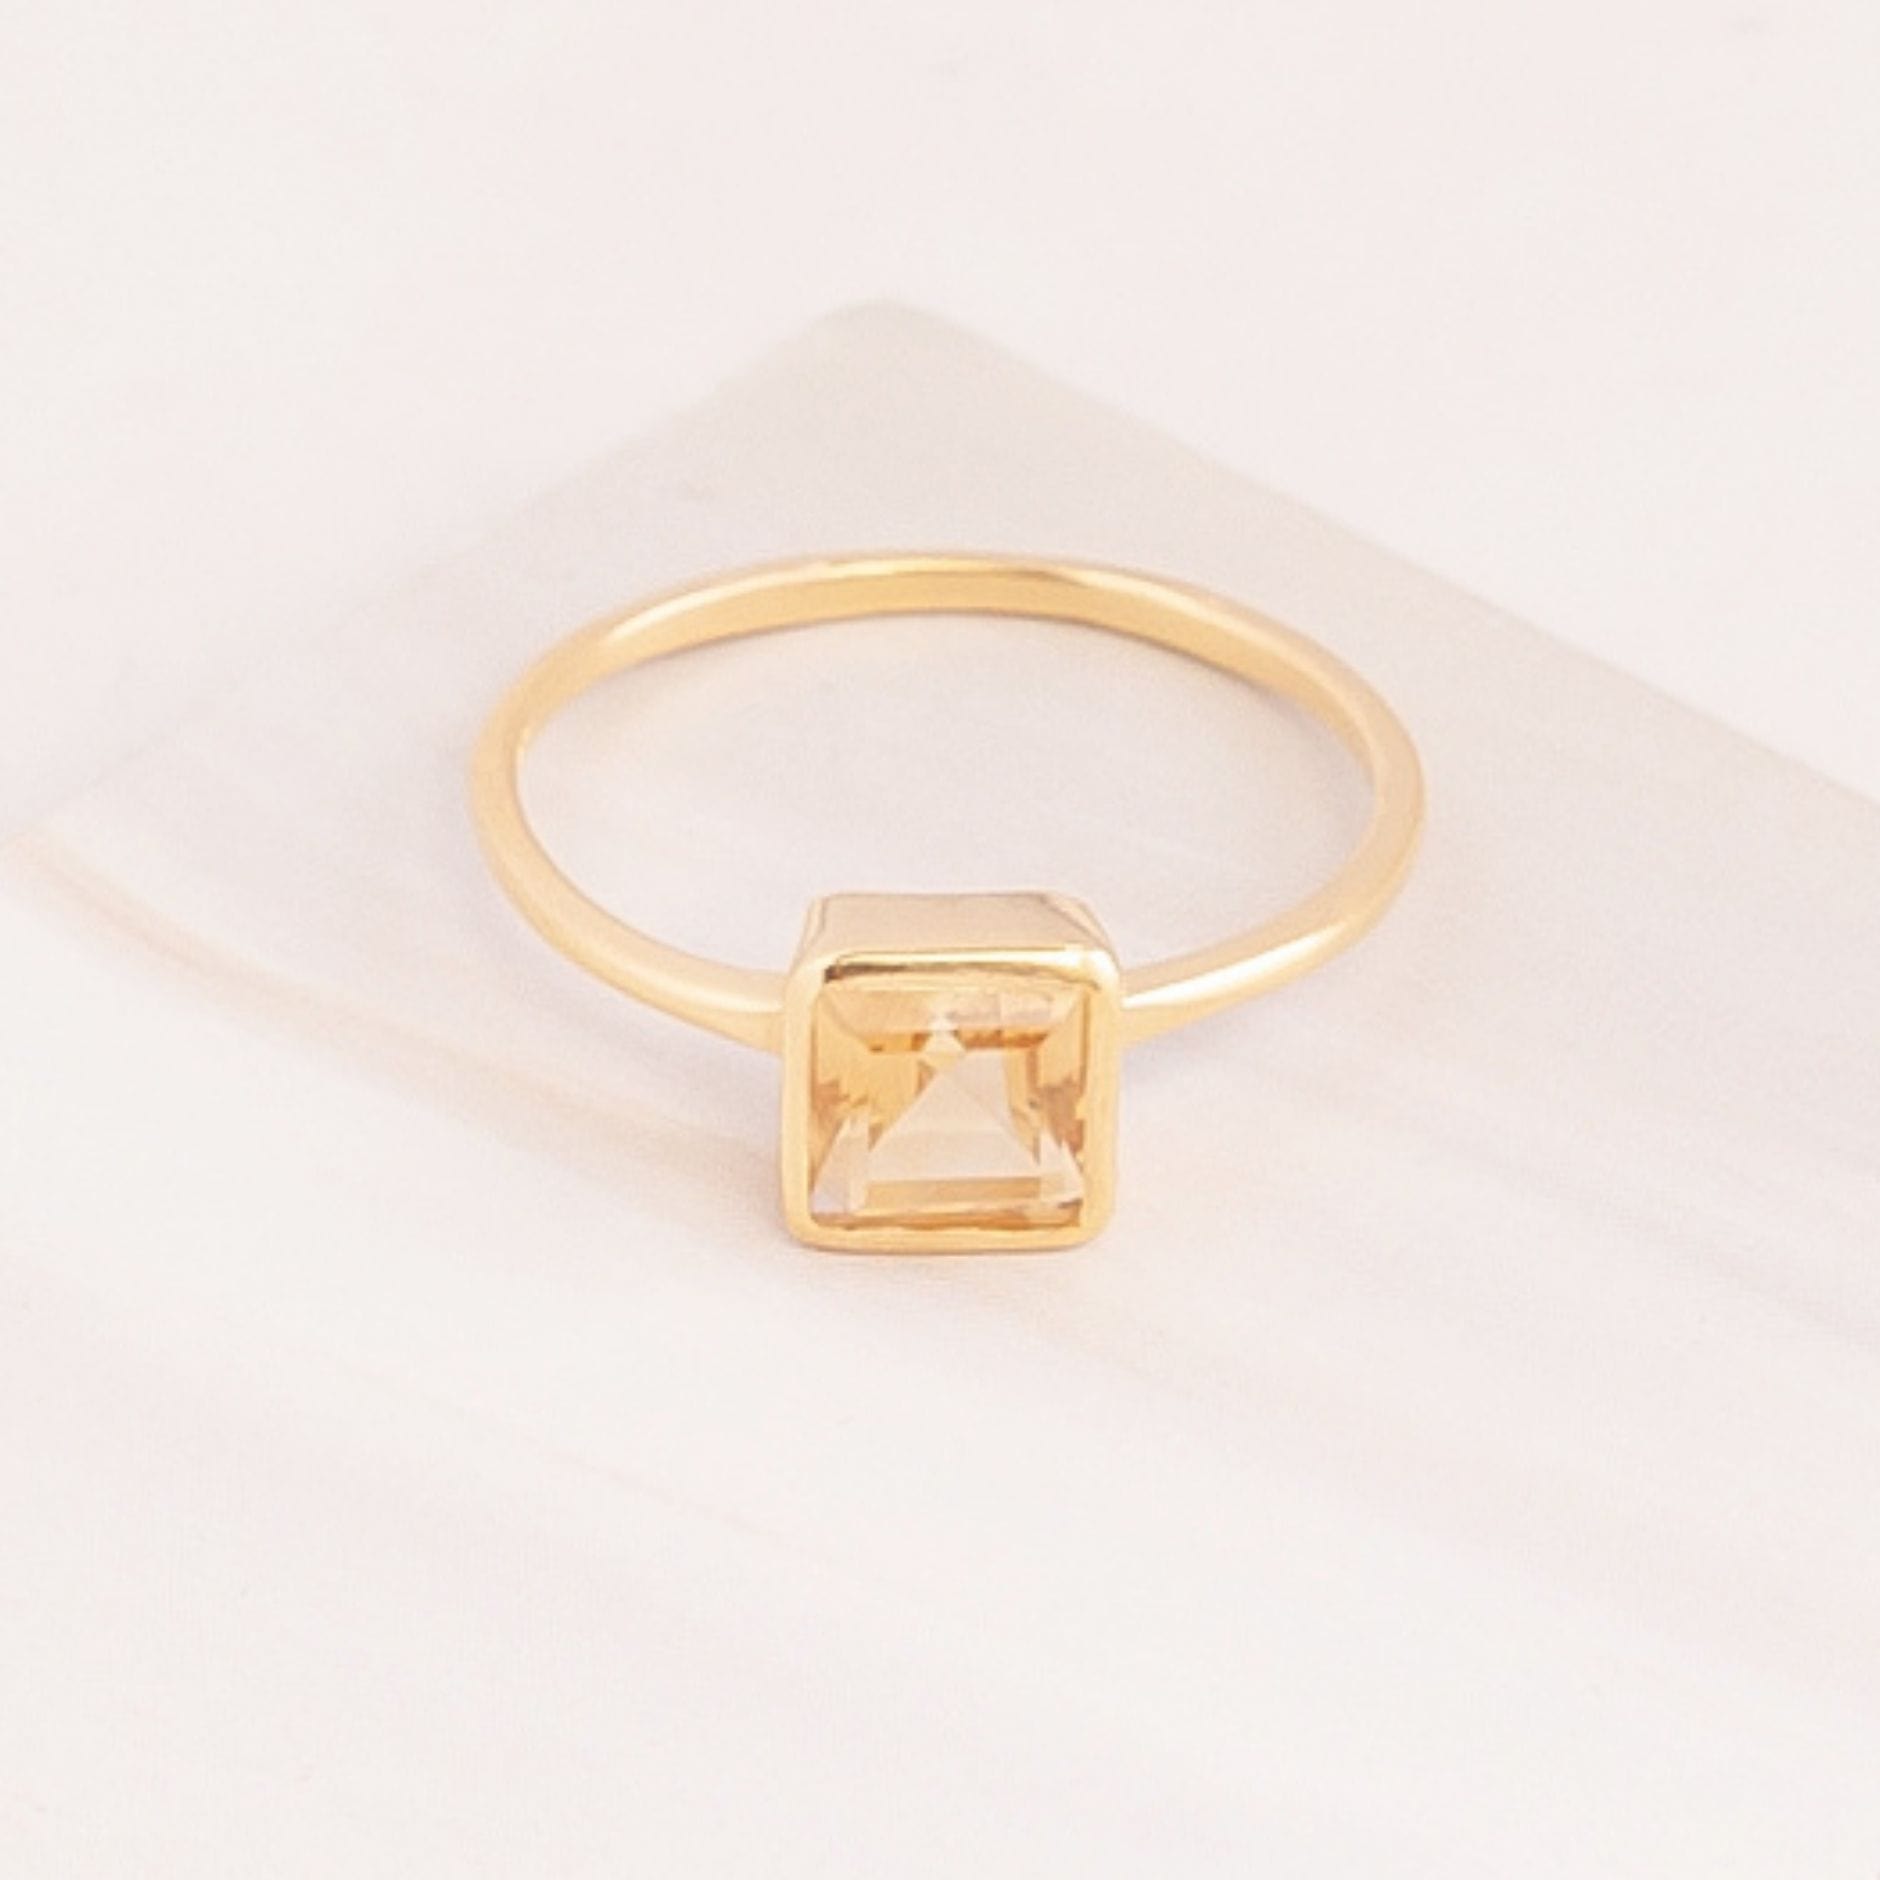 Emblem Jewelry Rings Yellow Citrine / Square Signature Candy Gemstone Stack Rings (Ring Size 6)